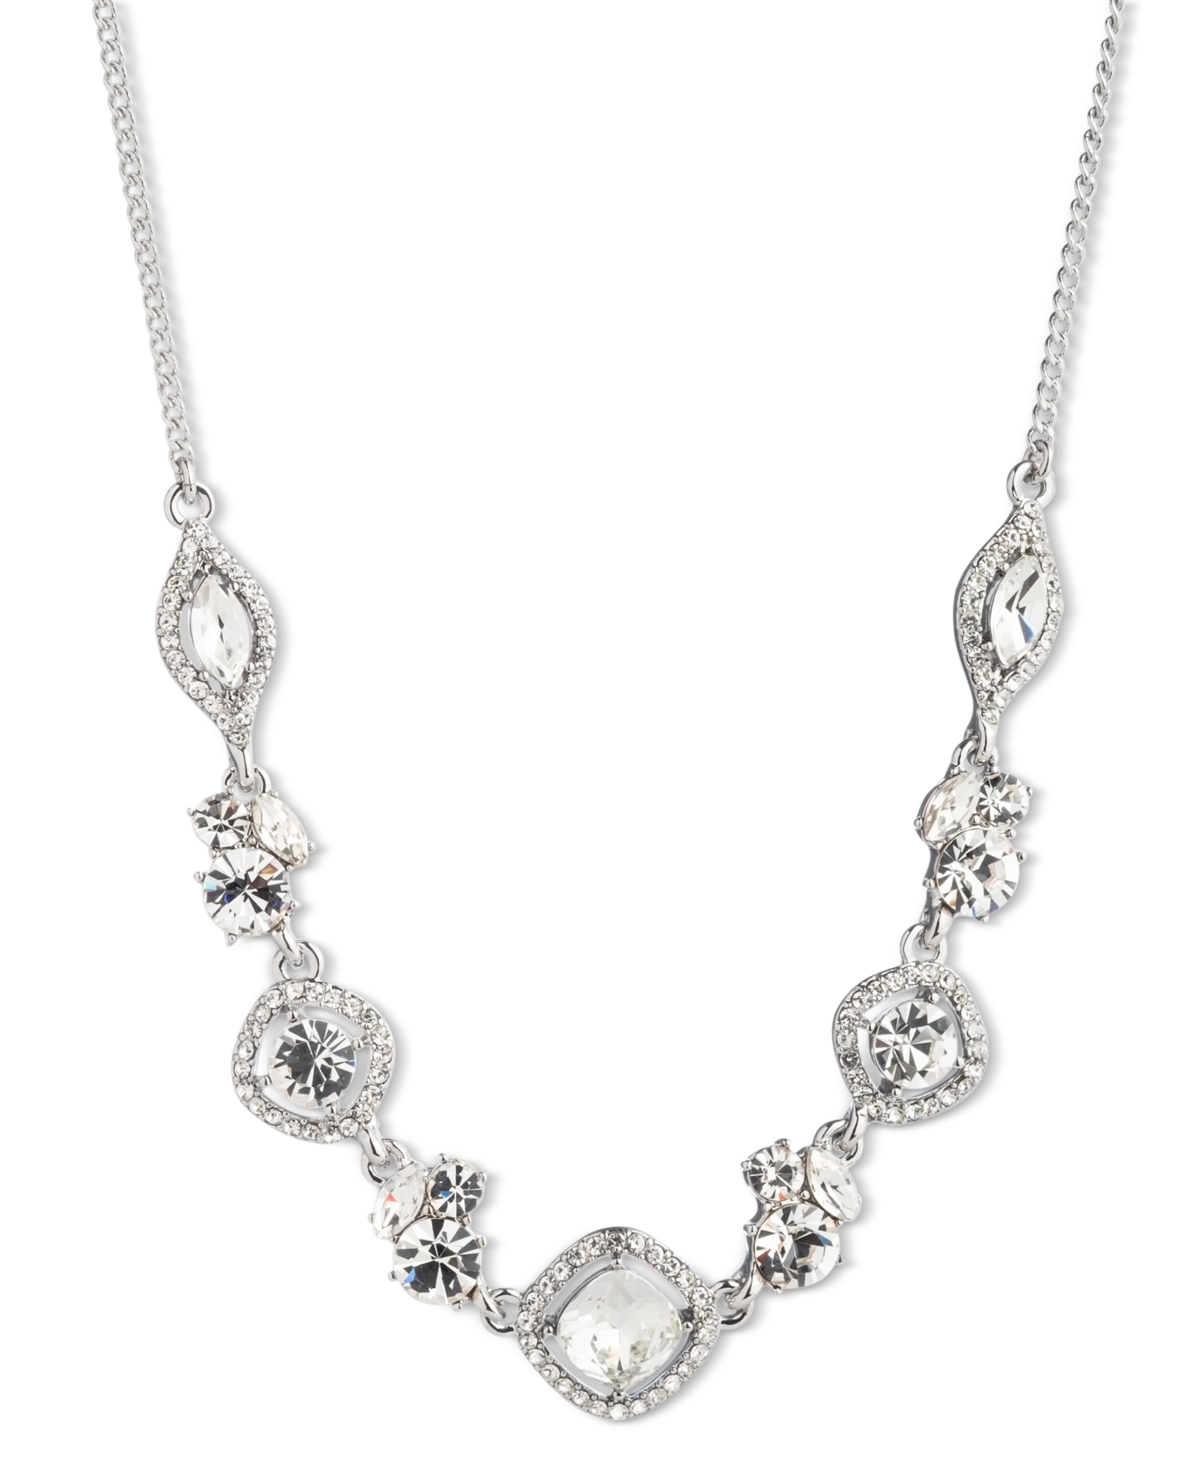 Mixed Crystal Statement Necklace, 16" + 3" extender - White